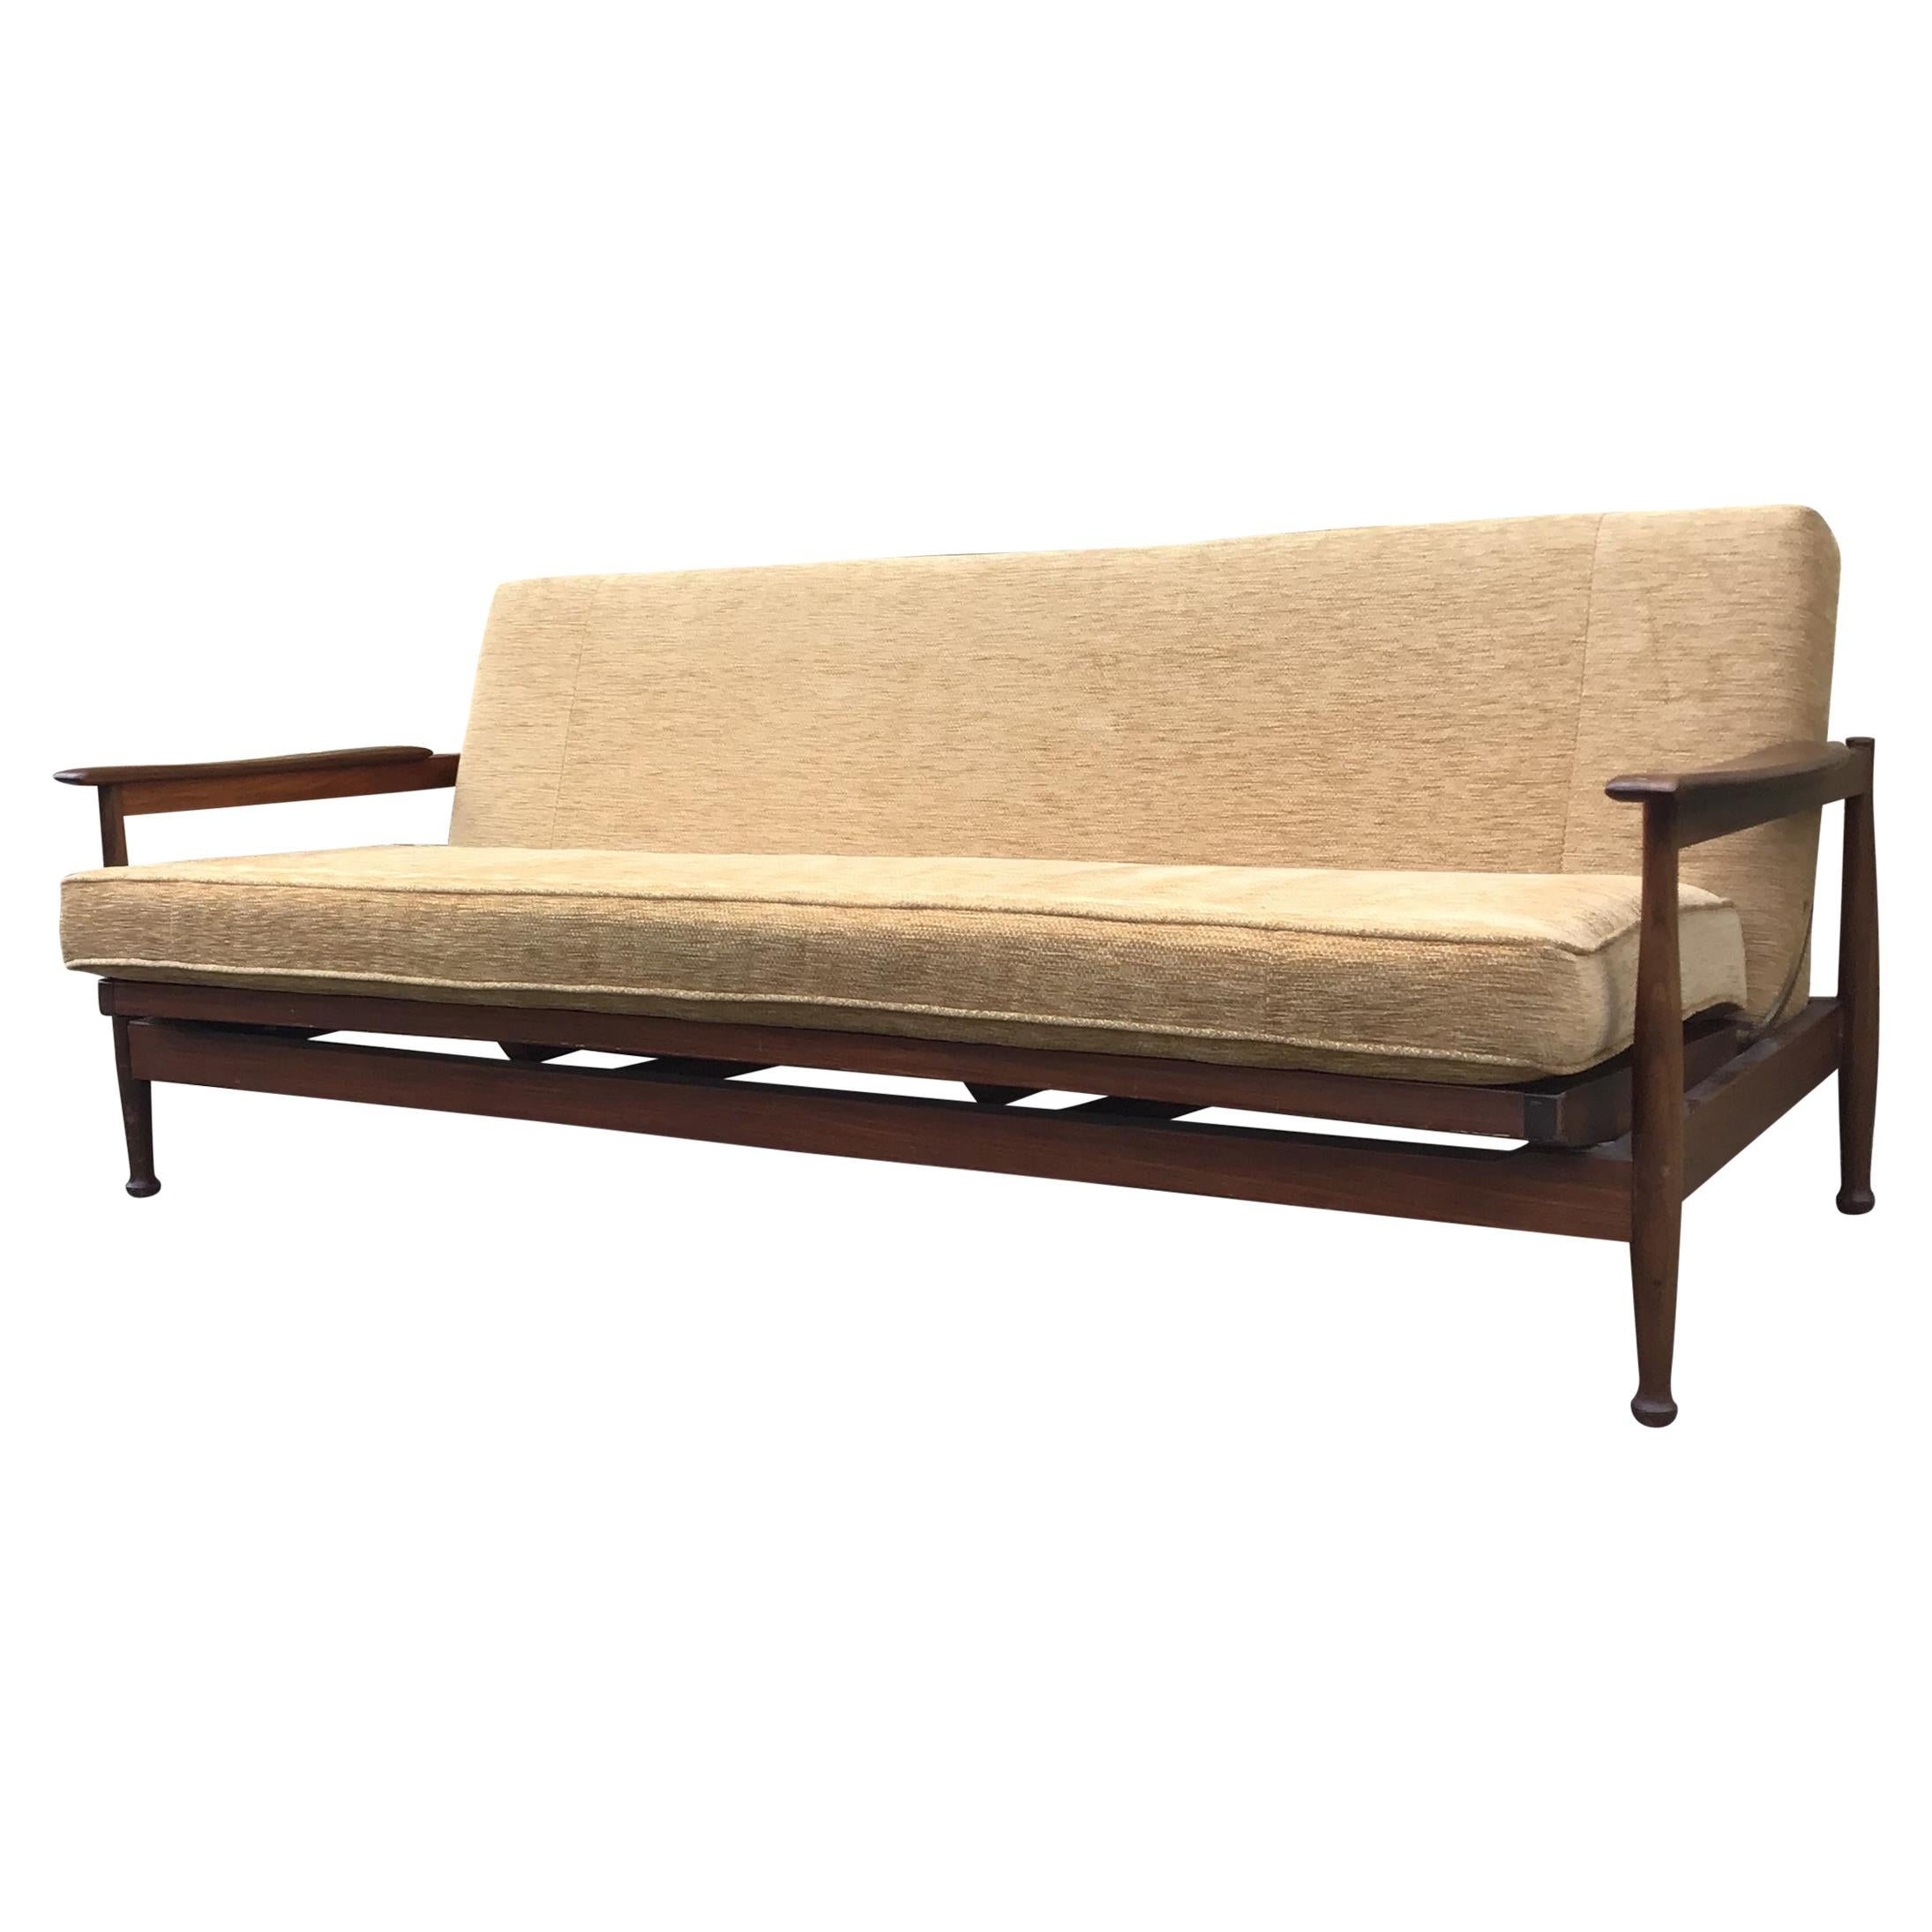 Guy Rogers 3-Seat Sofa/Daybed by Eric Pamphilon and George Freyer /1960s Daybed